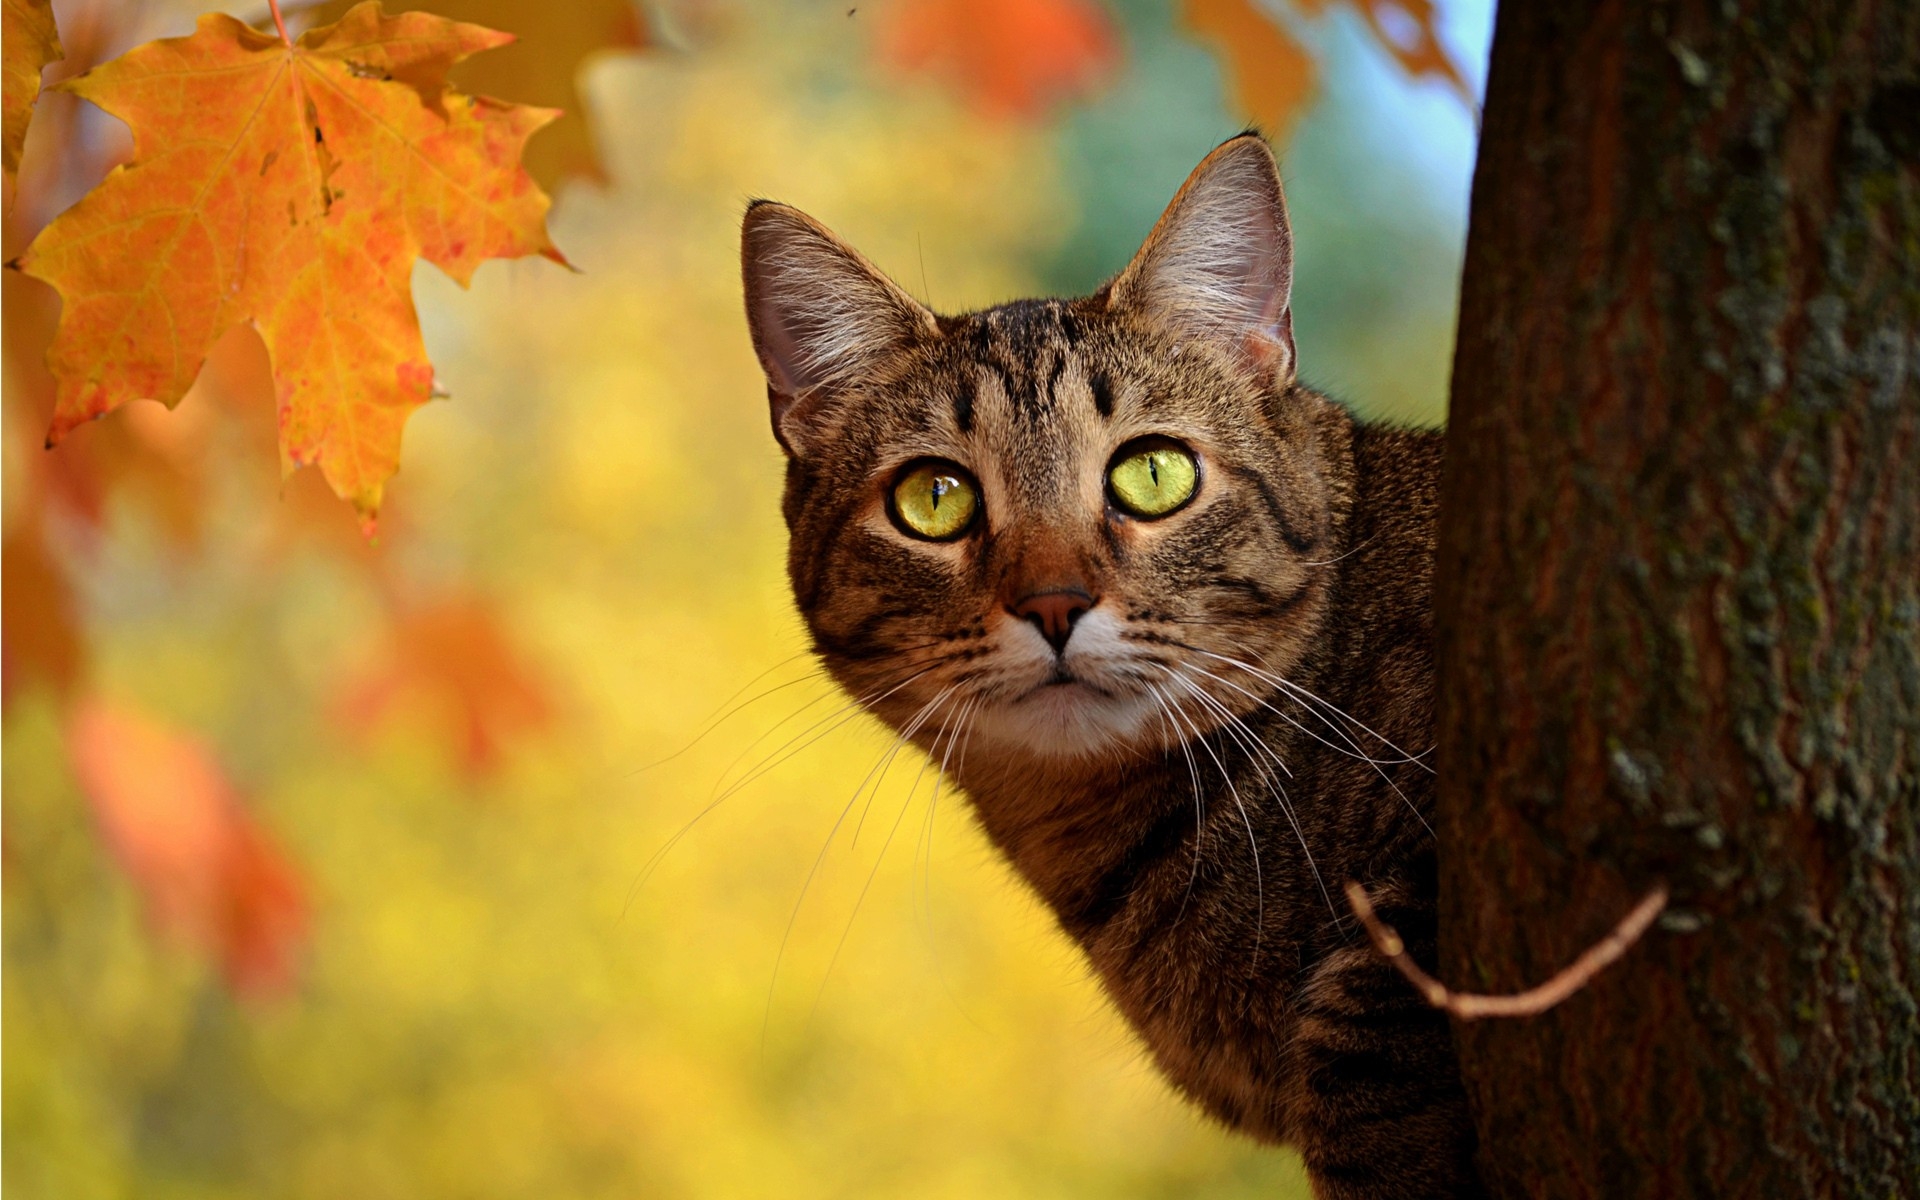 nature trees cats animals leaves green eyes pets tabby autumn 1920x1200 wallpaper High Quality Wallpaper, High Definition Wallpaper